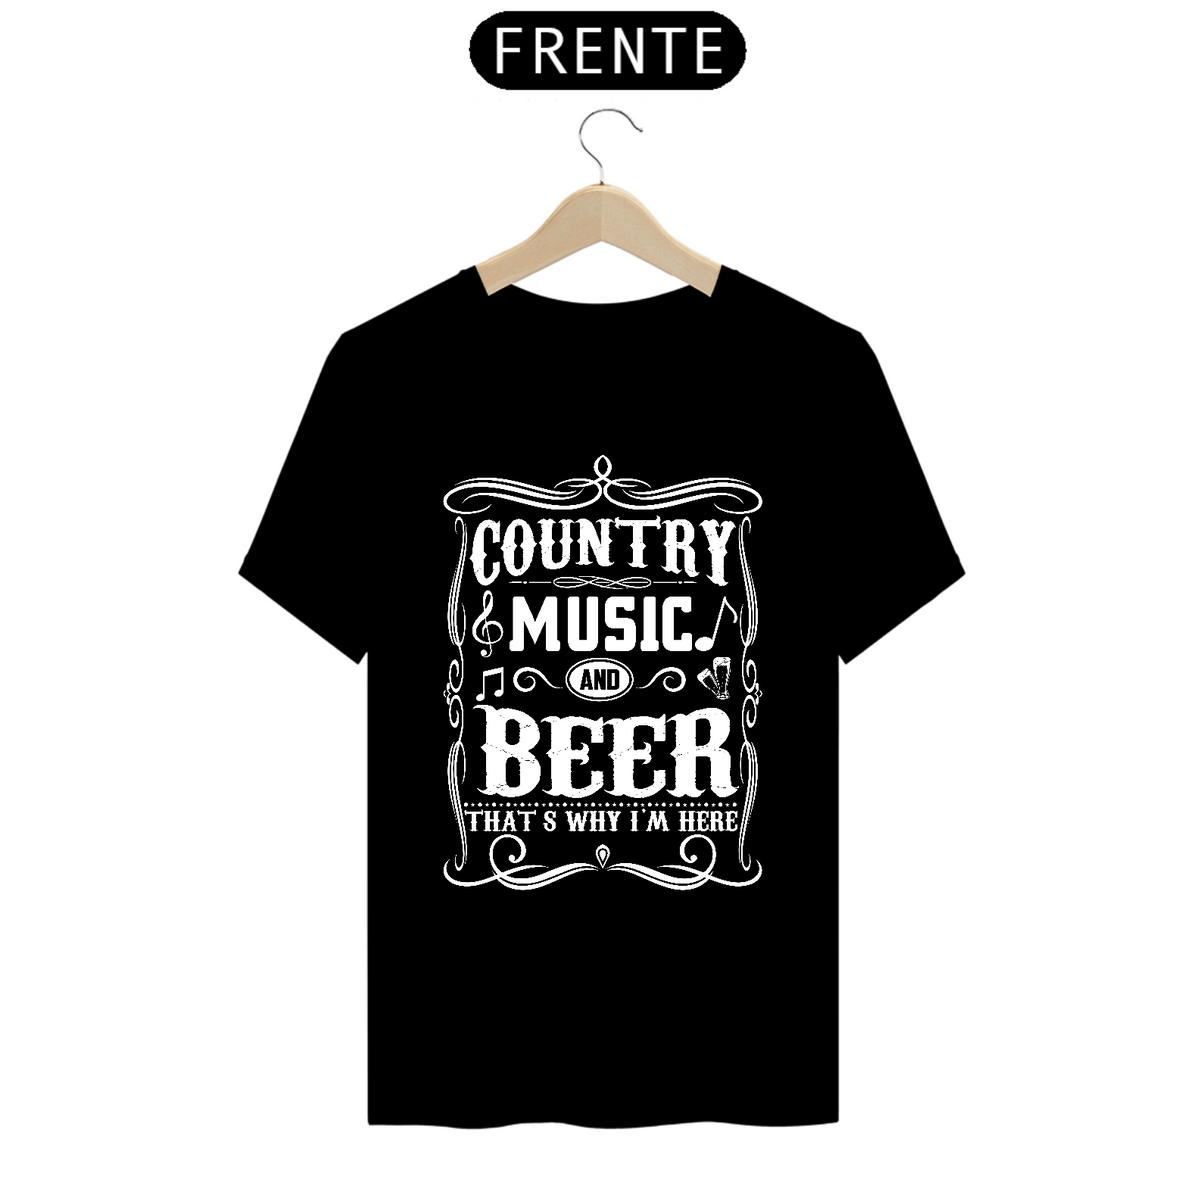 Nome do produto: T-Shirt Prime - Country Music and Beer